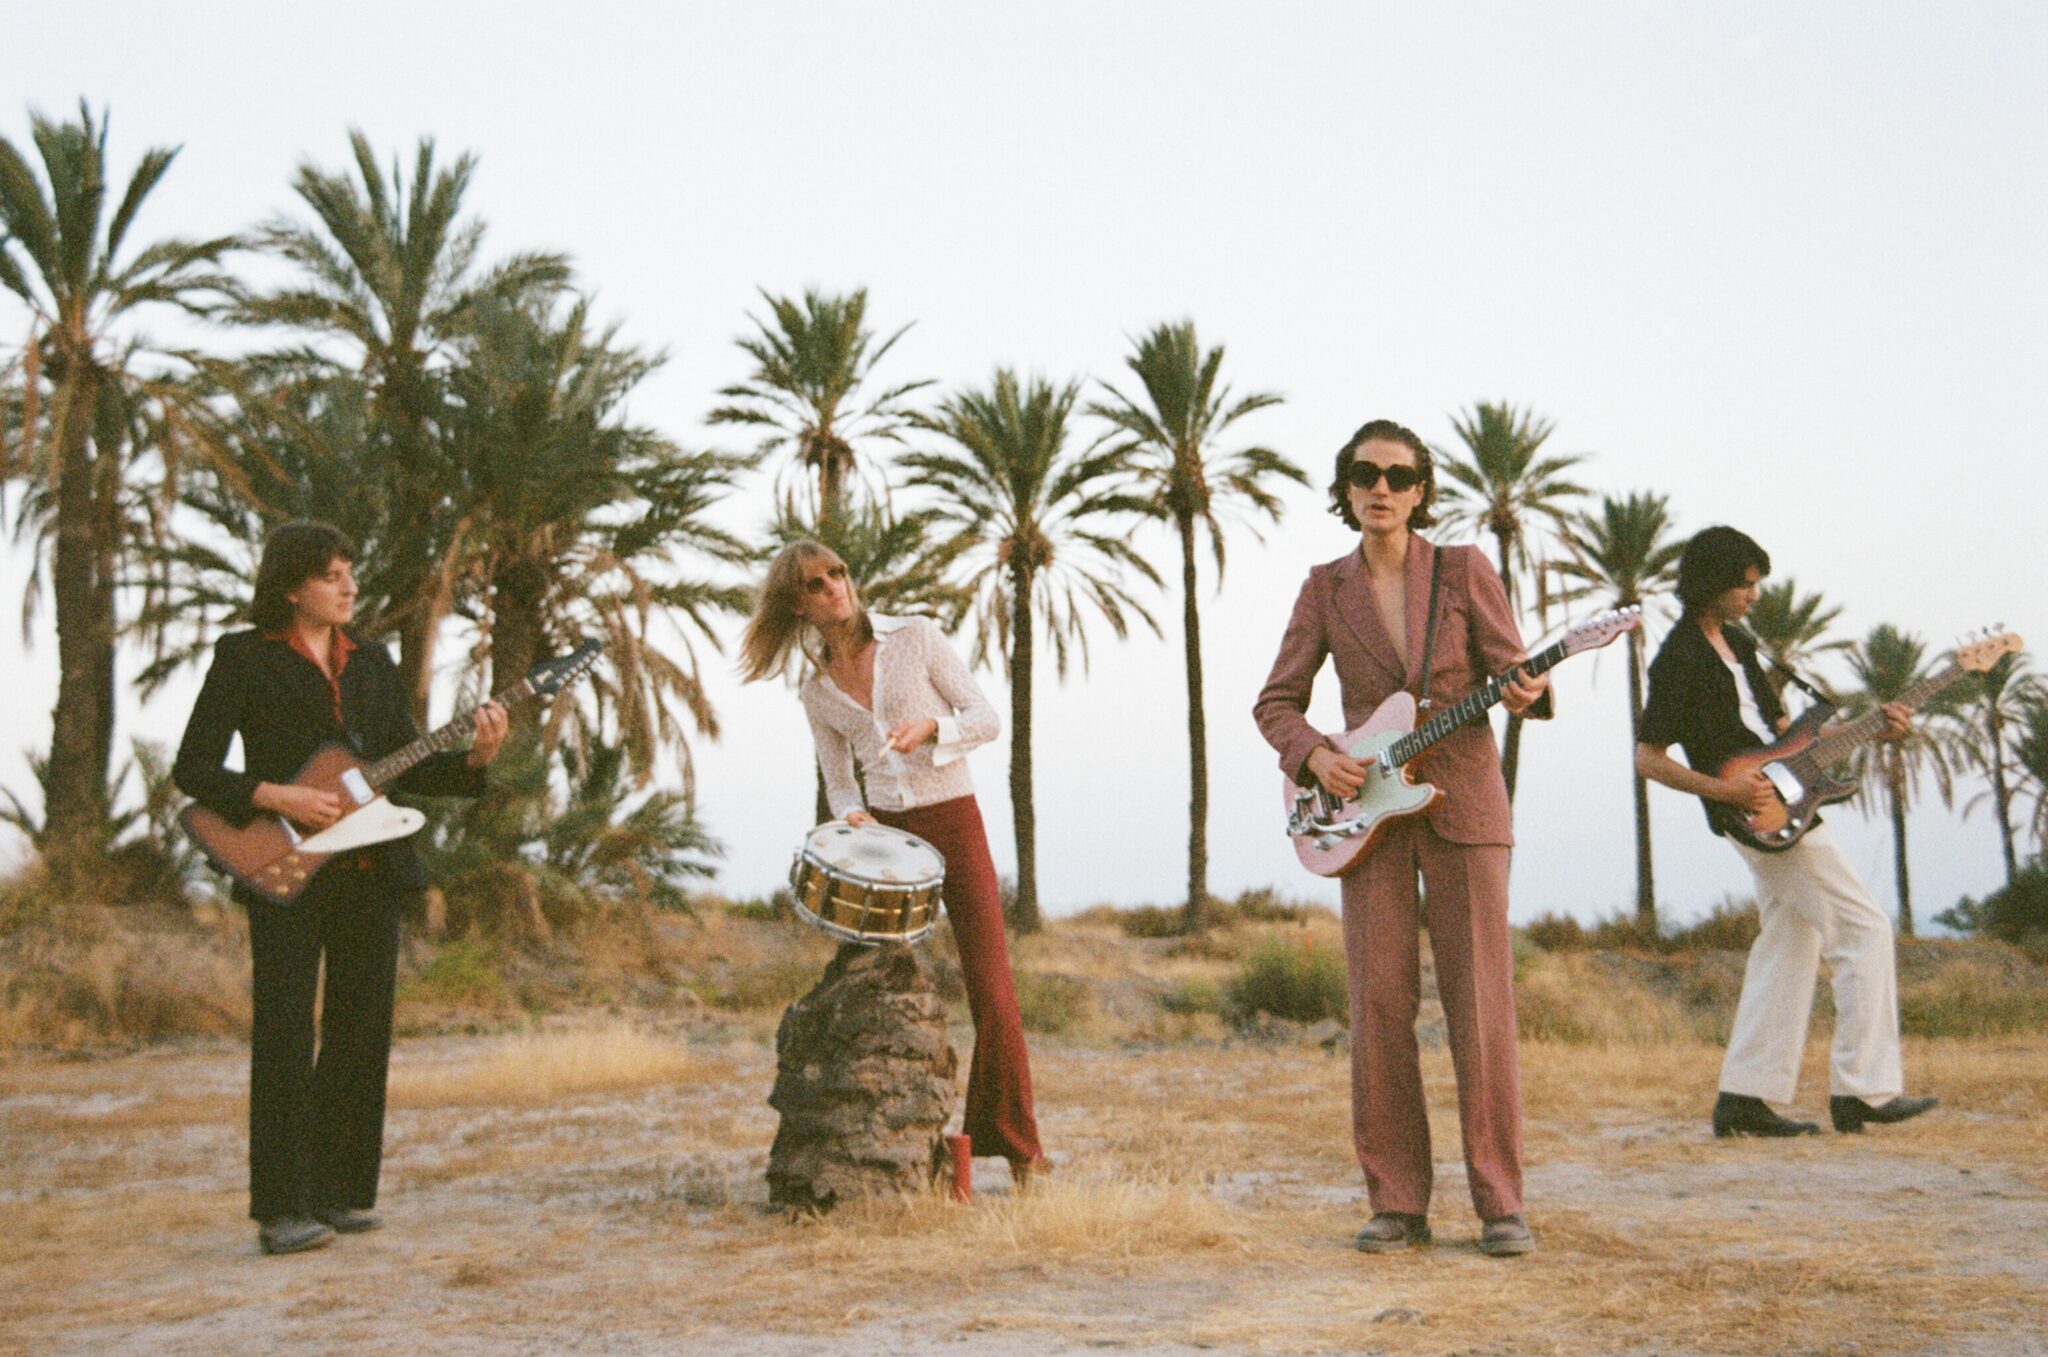 Temples band outside with palm trees in background